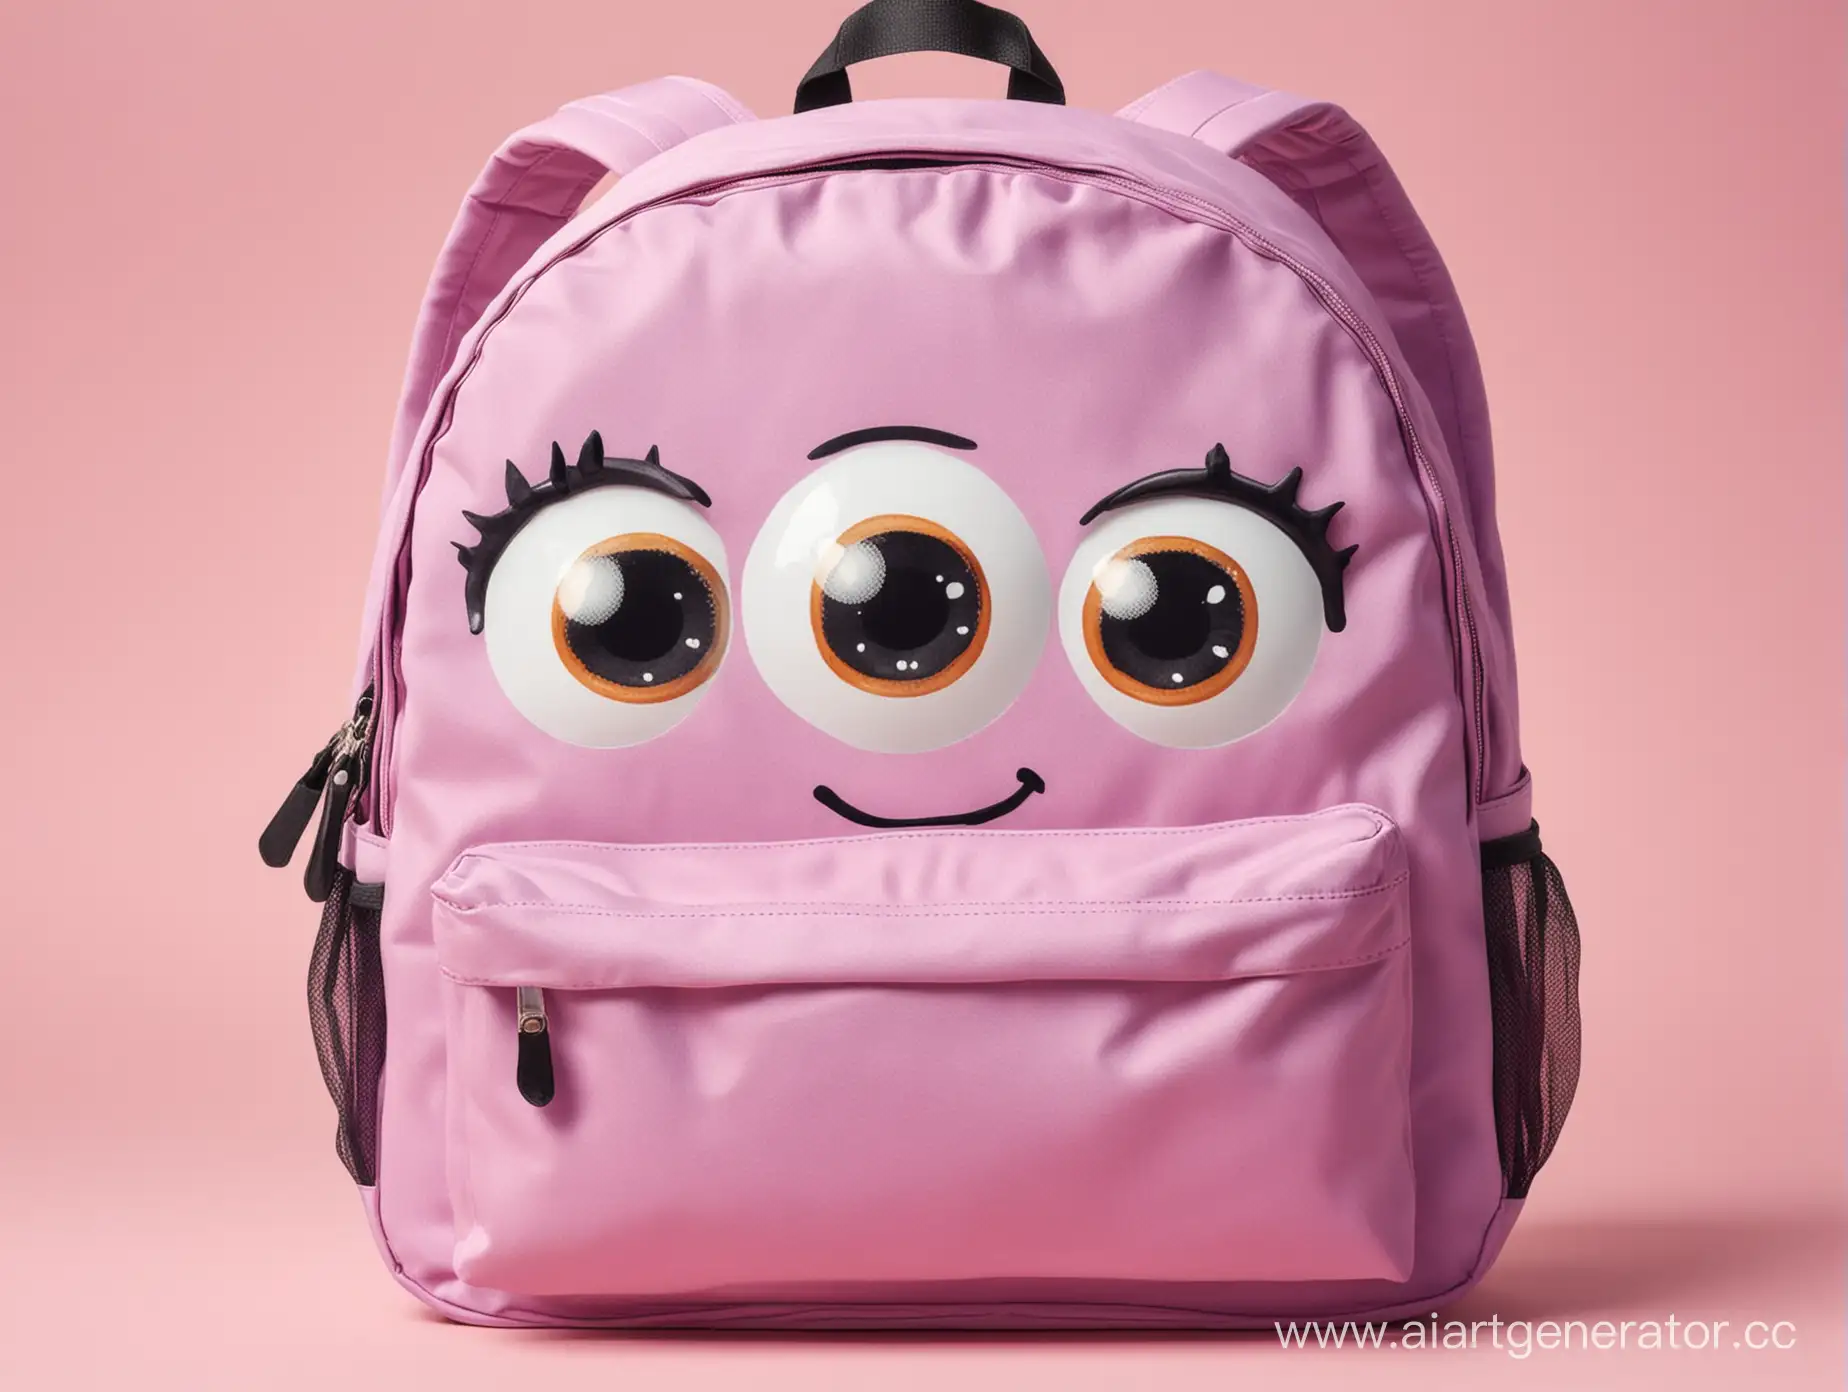 Cheerful-Cartoon-Backpack-with-Expressive-Features